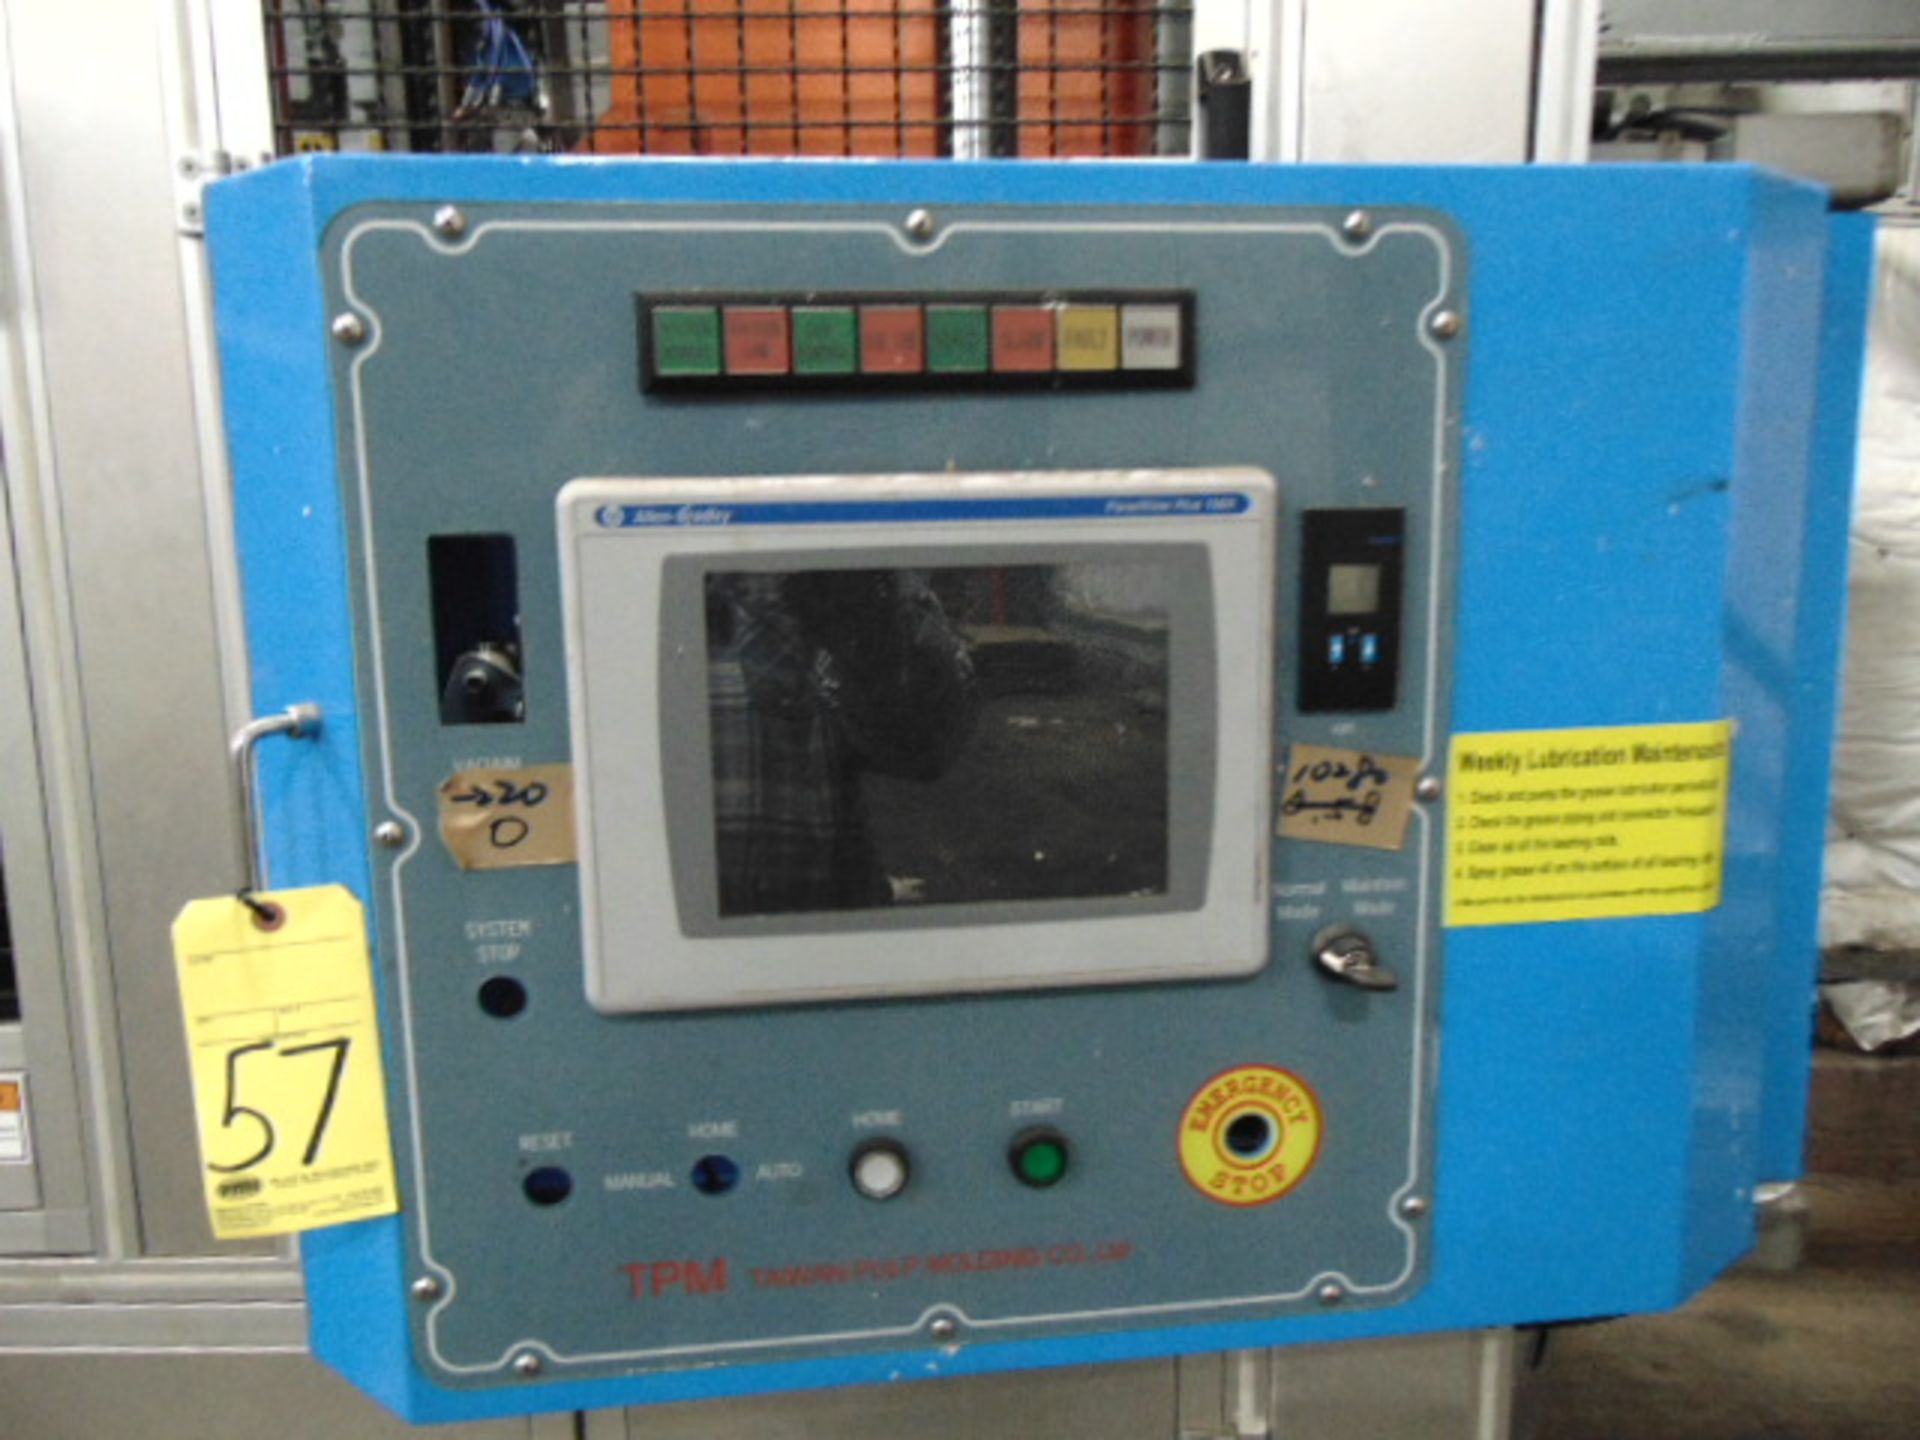 THERMOFORMING MACHINE, TAIWAN PULP MOLDING MDL. TPM-850, mfg. 5/2015, 850mm x 750mm x 100mm - Image 2 of 7